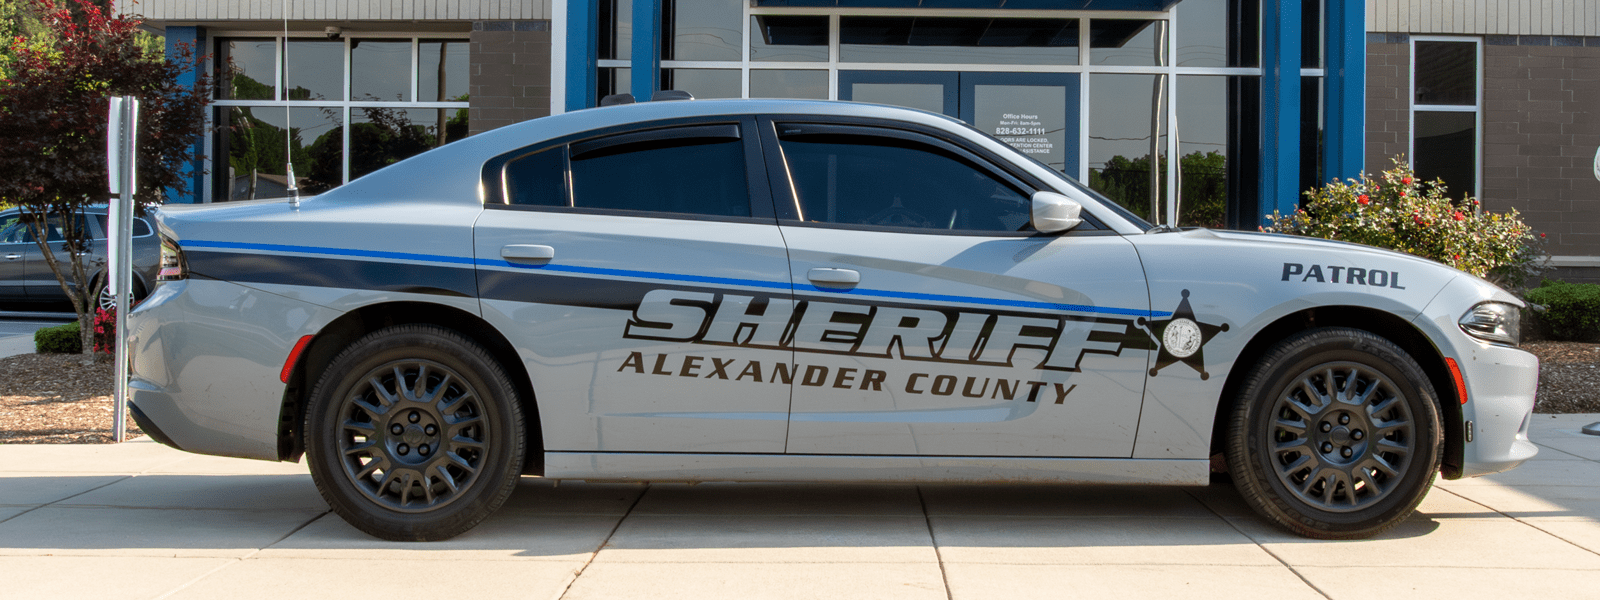 Image of Alexander County Sheriff's Office